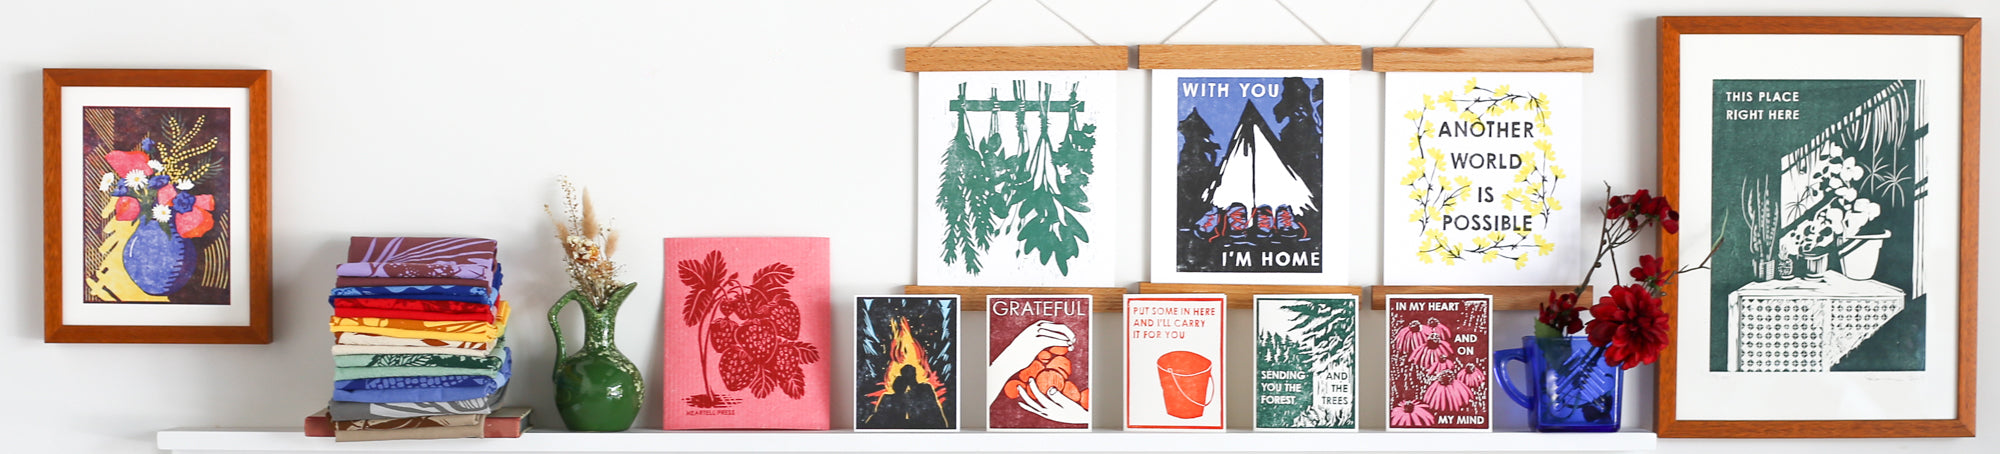 Heartell Press block printed greeting cards, art prints, kitchen towels and sponge cloths.